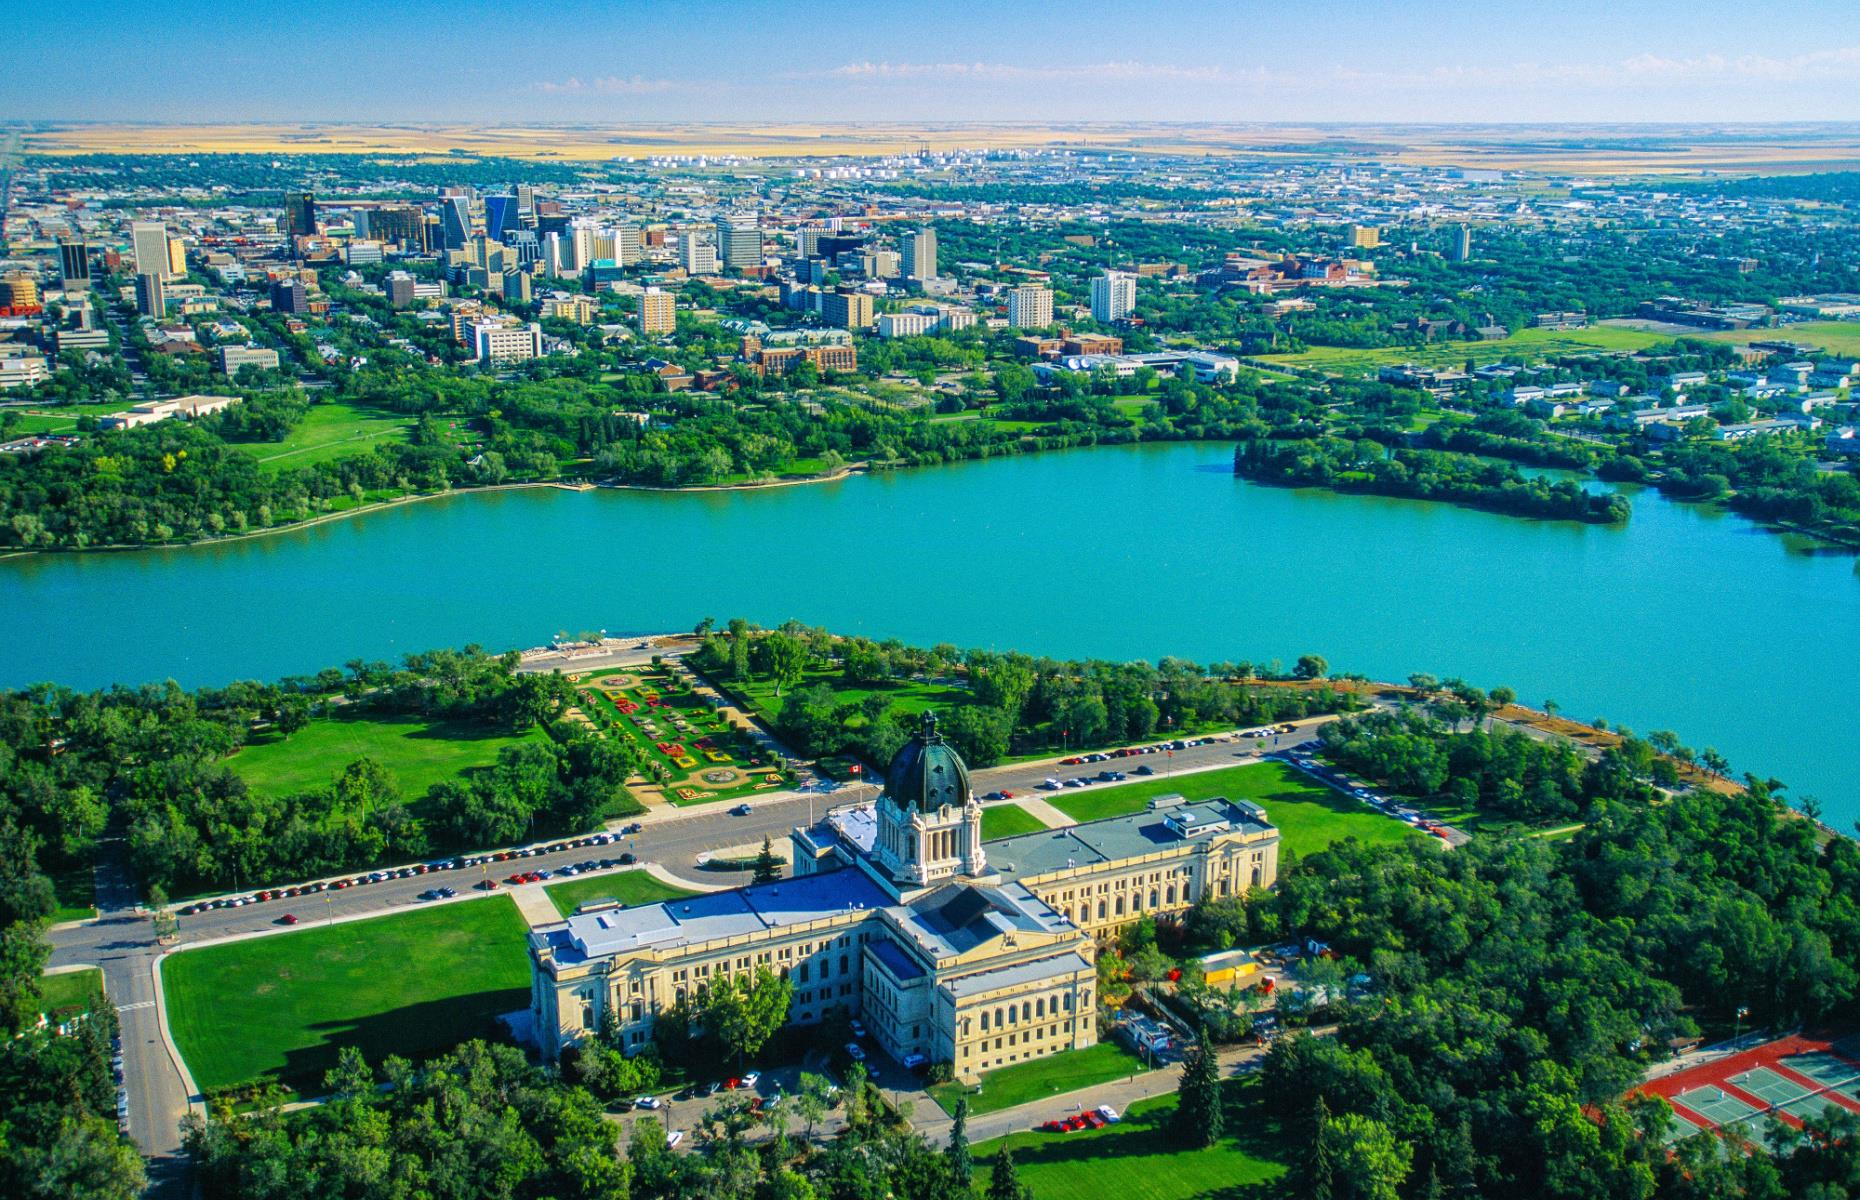 <p>Regina doesn’t get as much fanfare as its neighbor Saskatoon, but it's a lovely city in its own right. The provincial capital’s <a href="https://wascana.ca/">Wascana Centre</a> is a tranquil city park with a 120-acre lake and miles of paved and natural trails, as well as a habitat conservation area housing 276 species of bird and 36 species of mammal. For some urban flair, Regina’s <a href="https://www.warehousedistrict.ca/">Warehouse District</a> positions itself as the 'soul of the city', with shops, restaurants and other businesses bringing new life to handsome old-brick warehouses.</p>